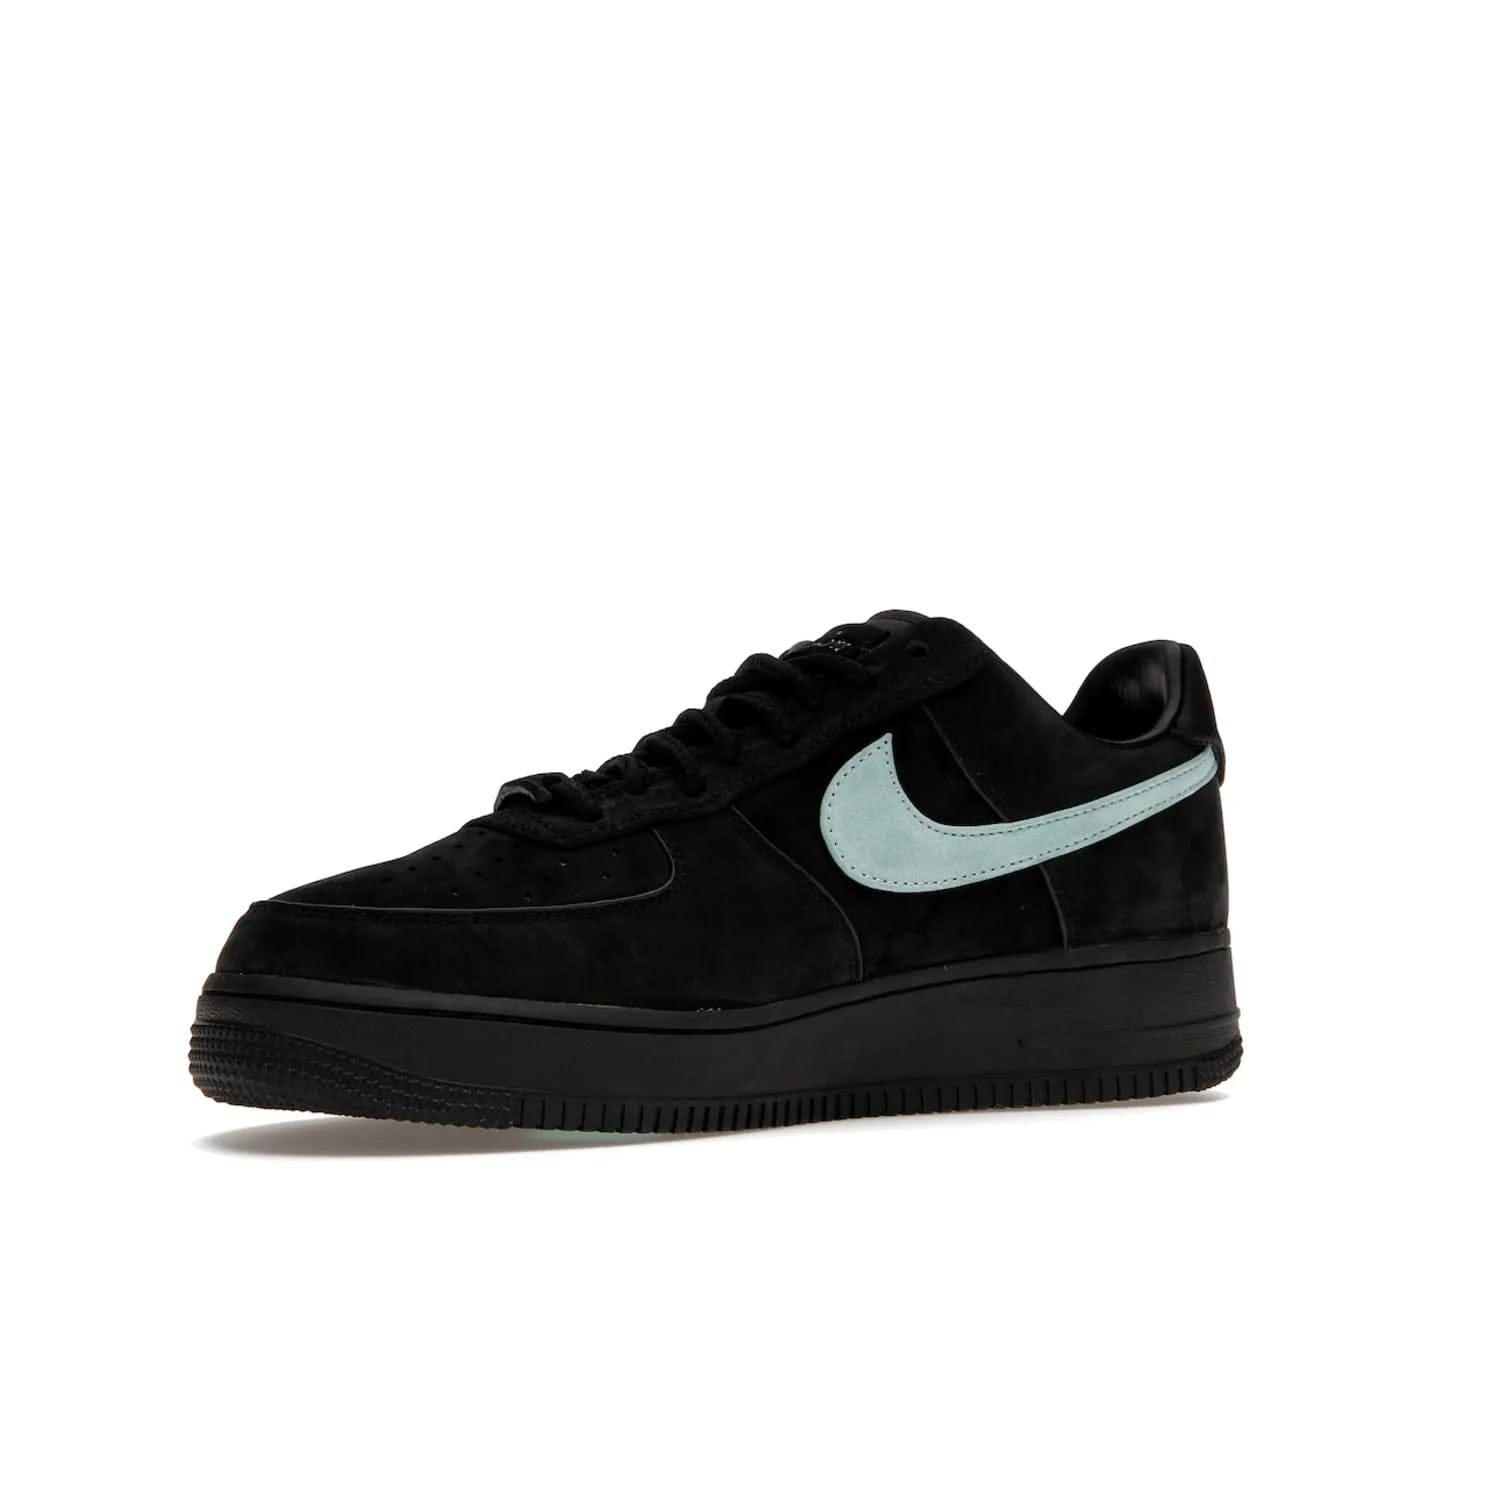 Nike Air Force 1 Low Tiffany & Co. 1837 - Image 16 - Only at www.BallersClubKickz.com - Nike & Tiffany & Co. collaborate on an exclusive sterling silver sneaker, the Air Force 1 Low Tiffany & Co. 1837. Featuring a suede uppr, Tiffany Blue Swoosh and "Tiffany" cursive branding, this pair of AF1s offers an opulent fusion of athleisure and luxury fashion. Release date March 2023.